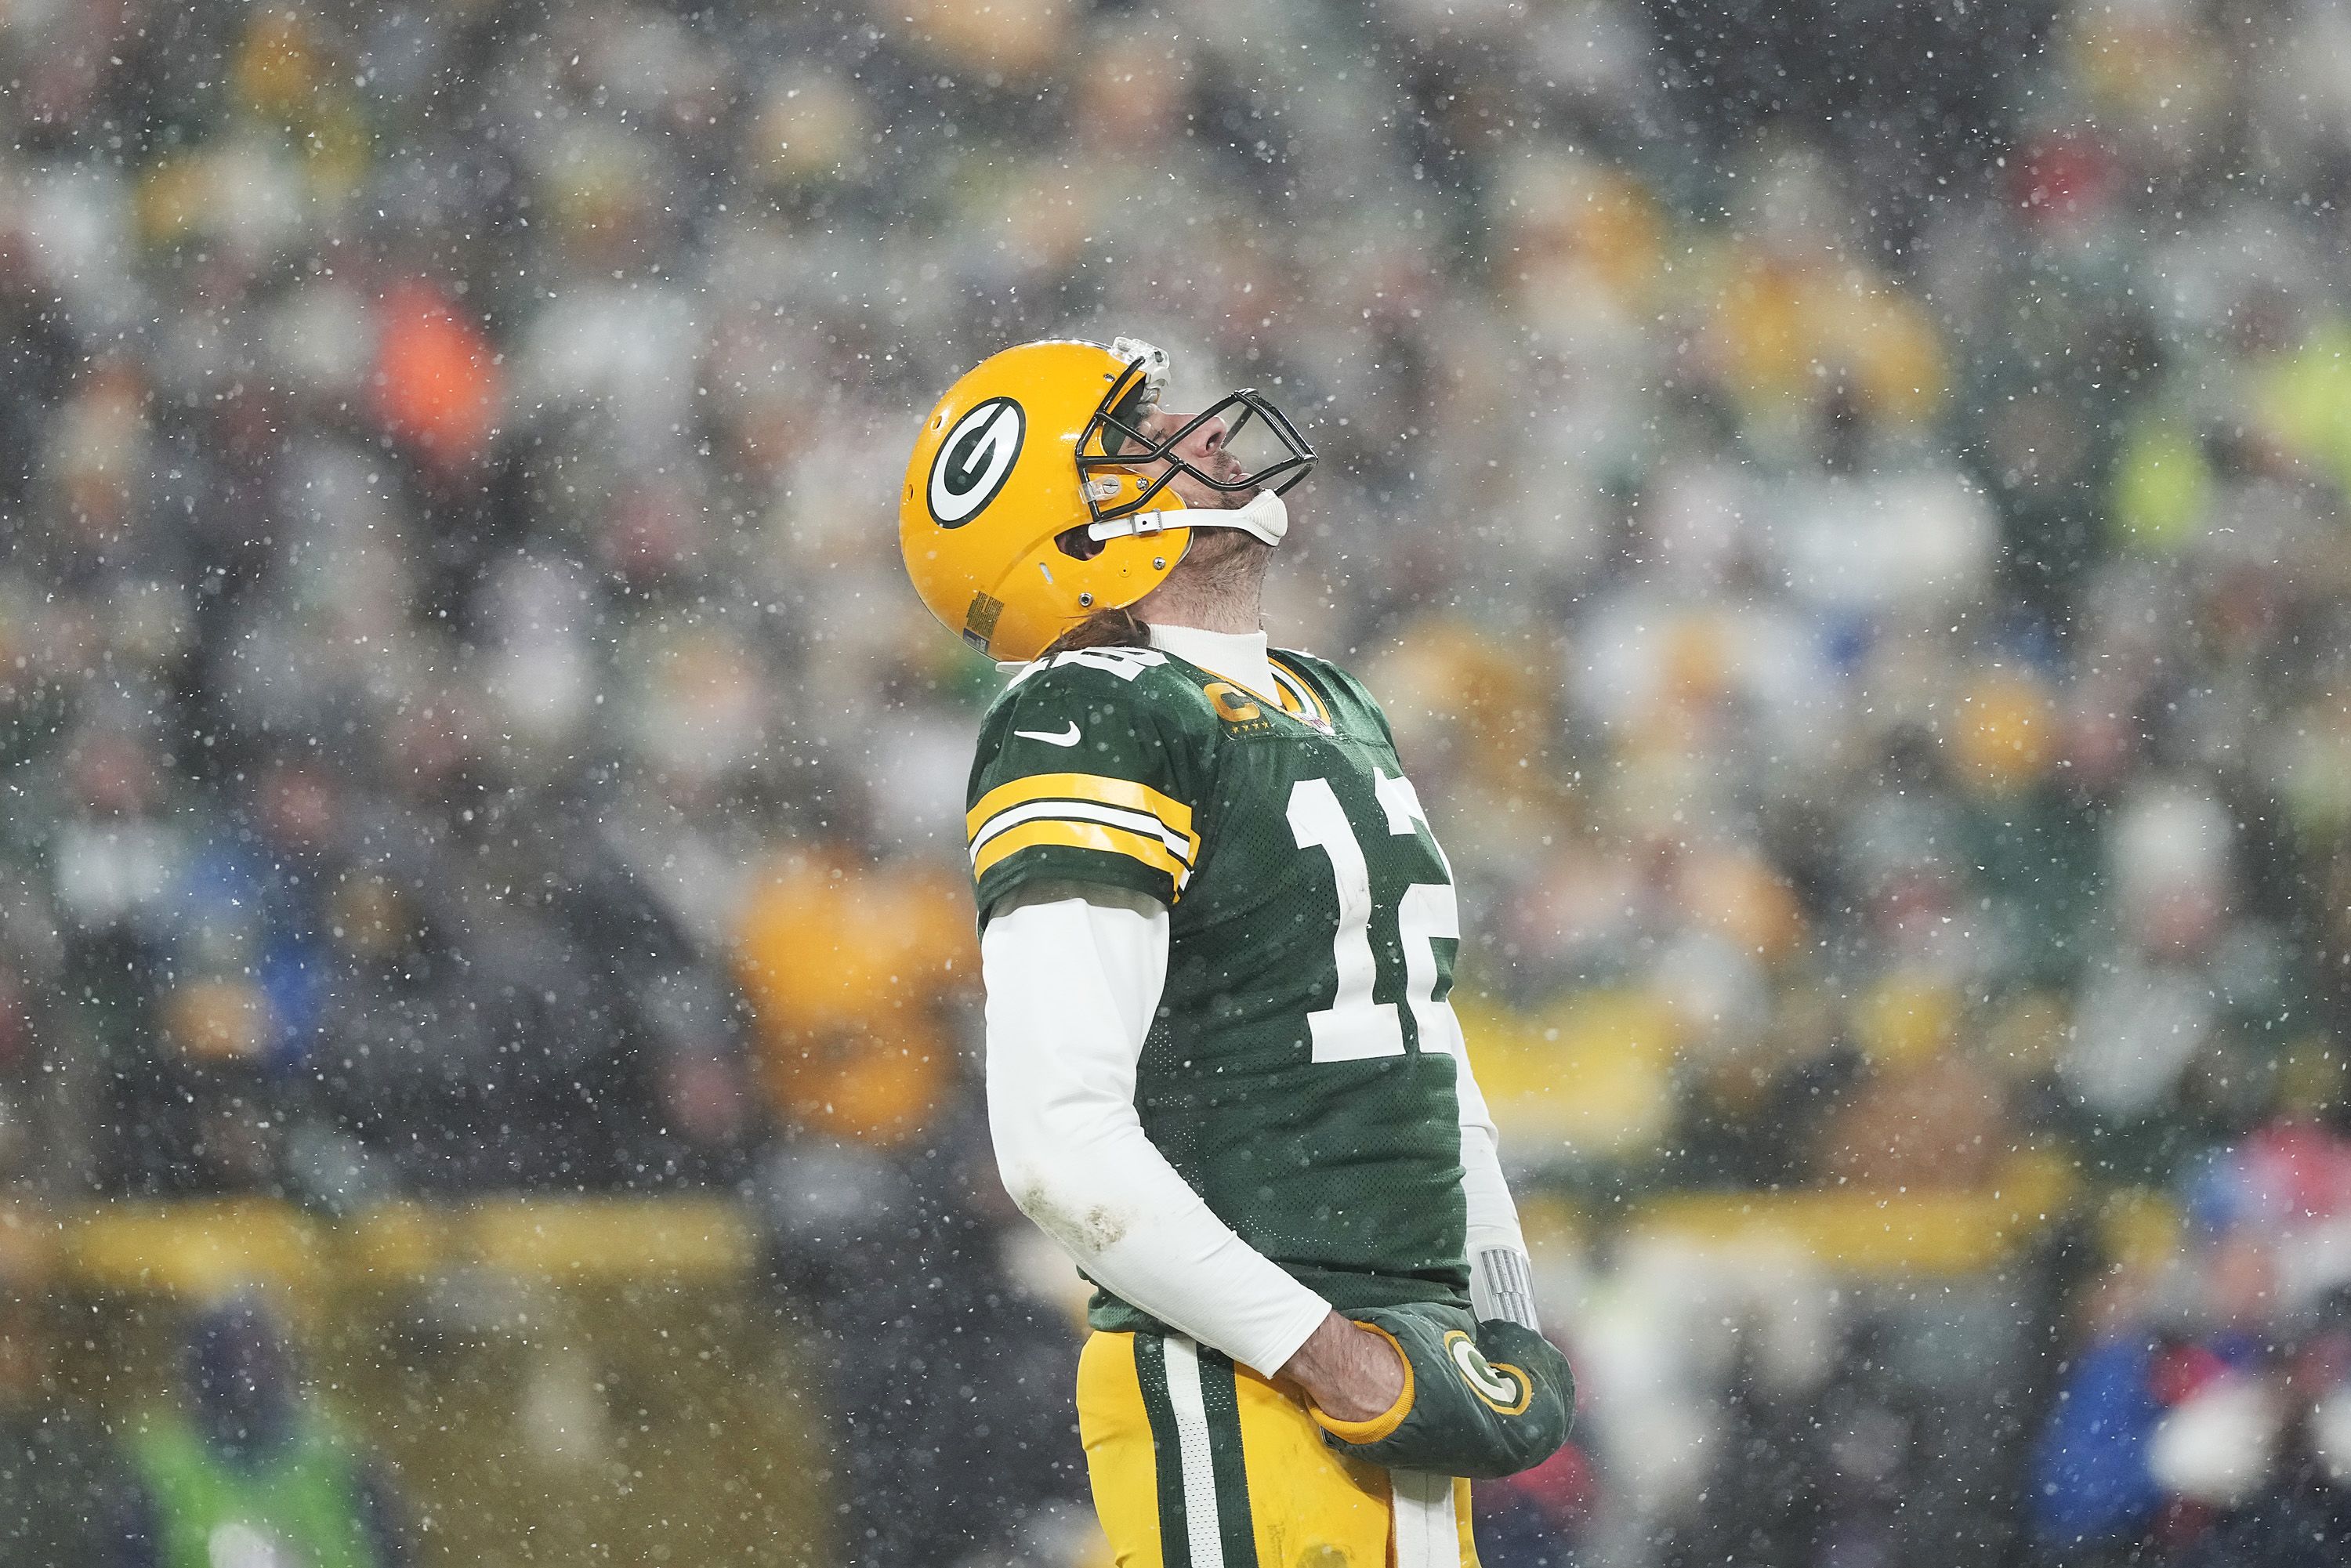 Video: Aaron Rodgers does ice in veins celebration after TD pass